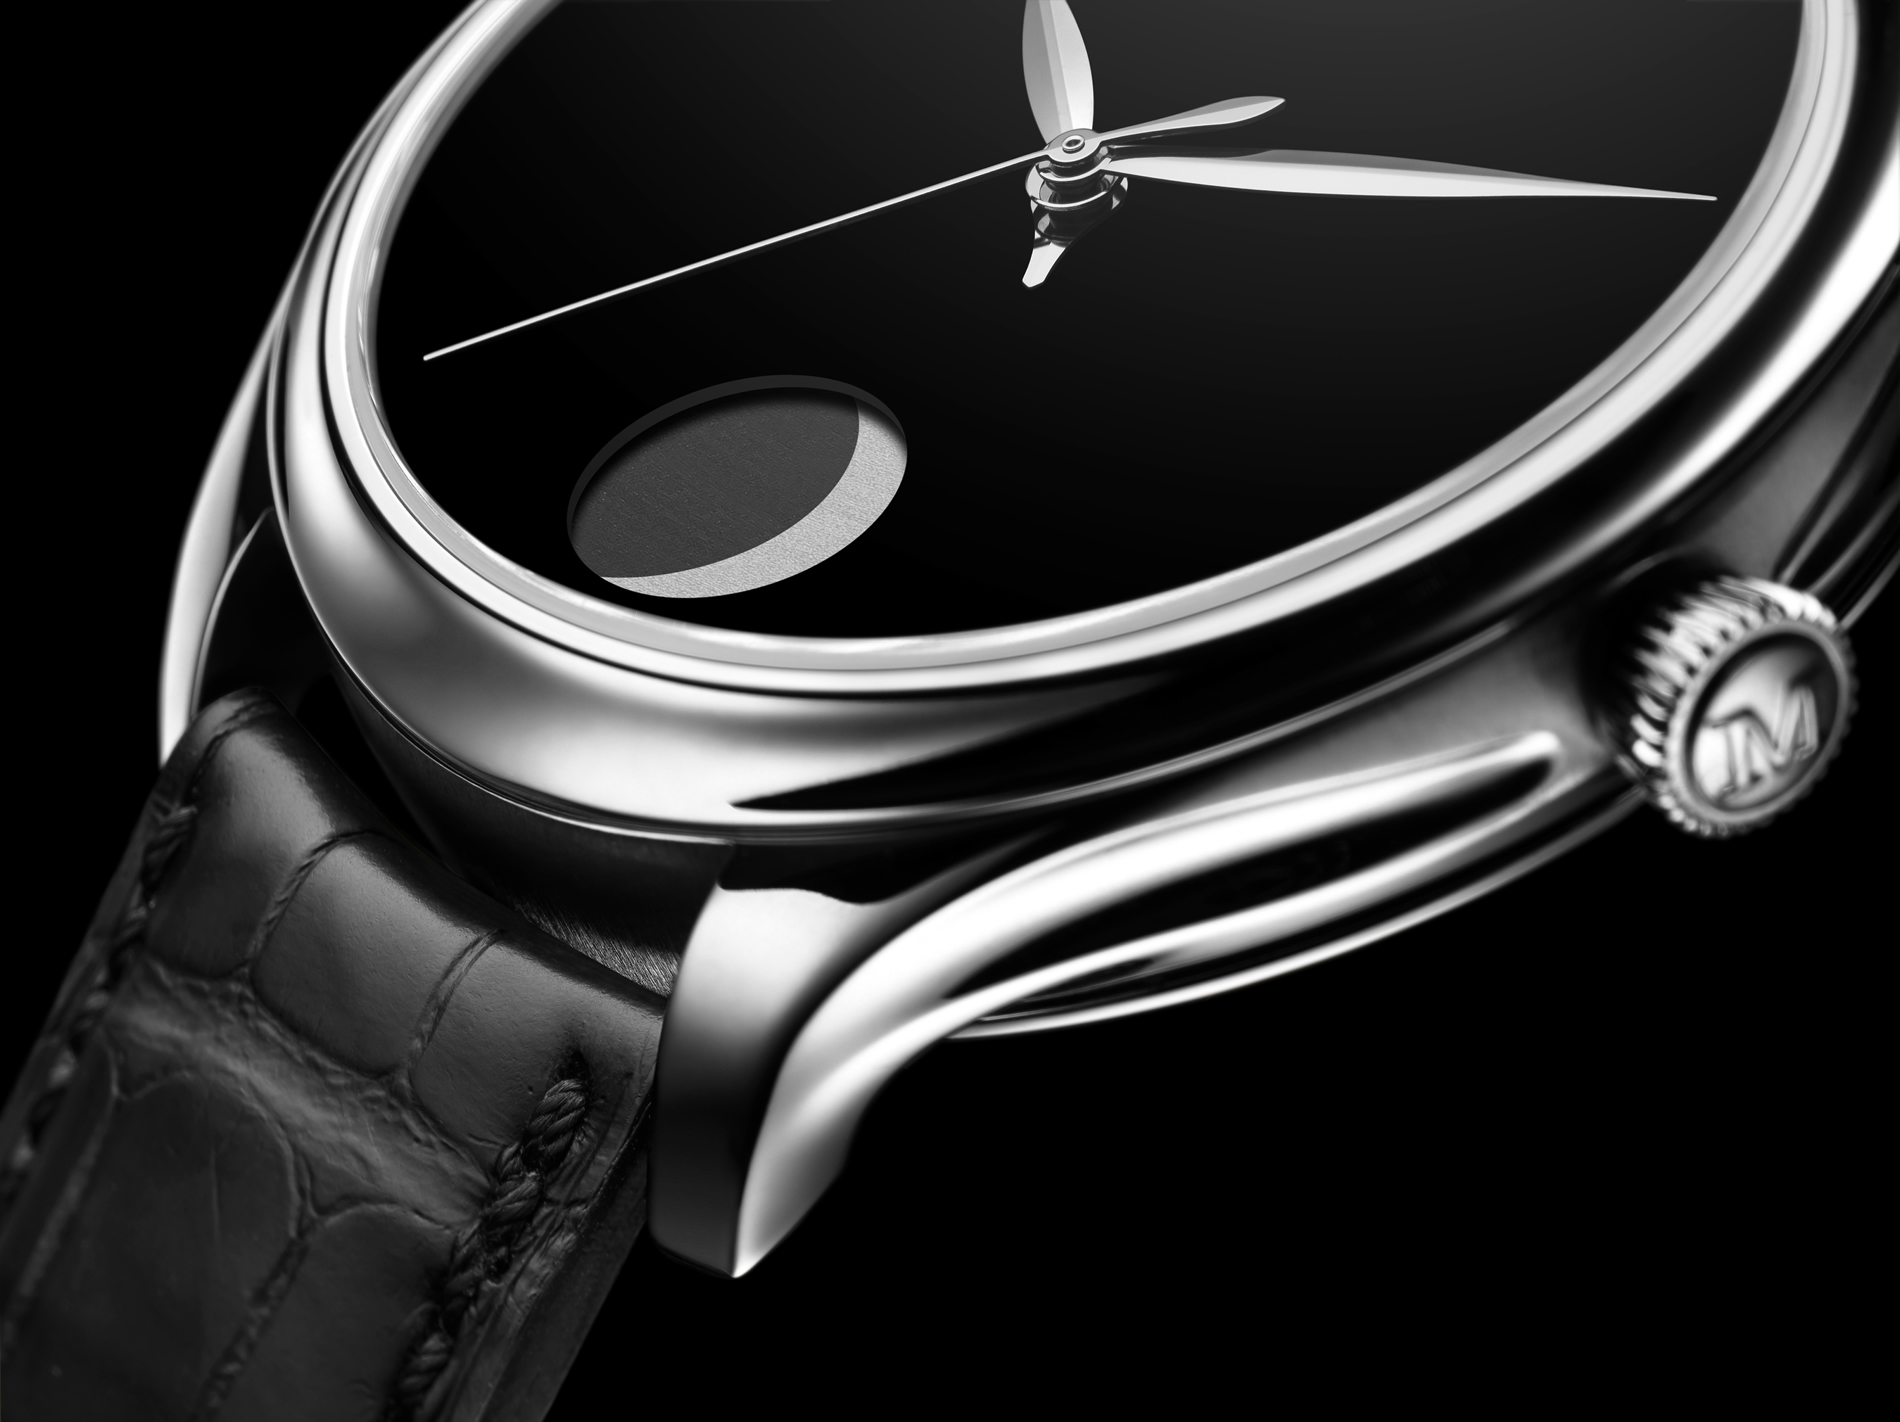 H. MOSER & CIE.: THE SOMBRE BEAUTY OF THE MOON